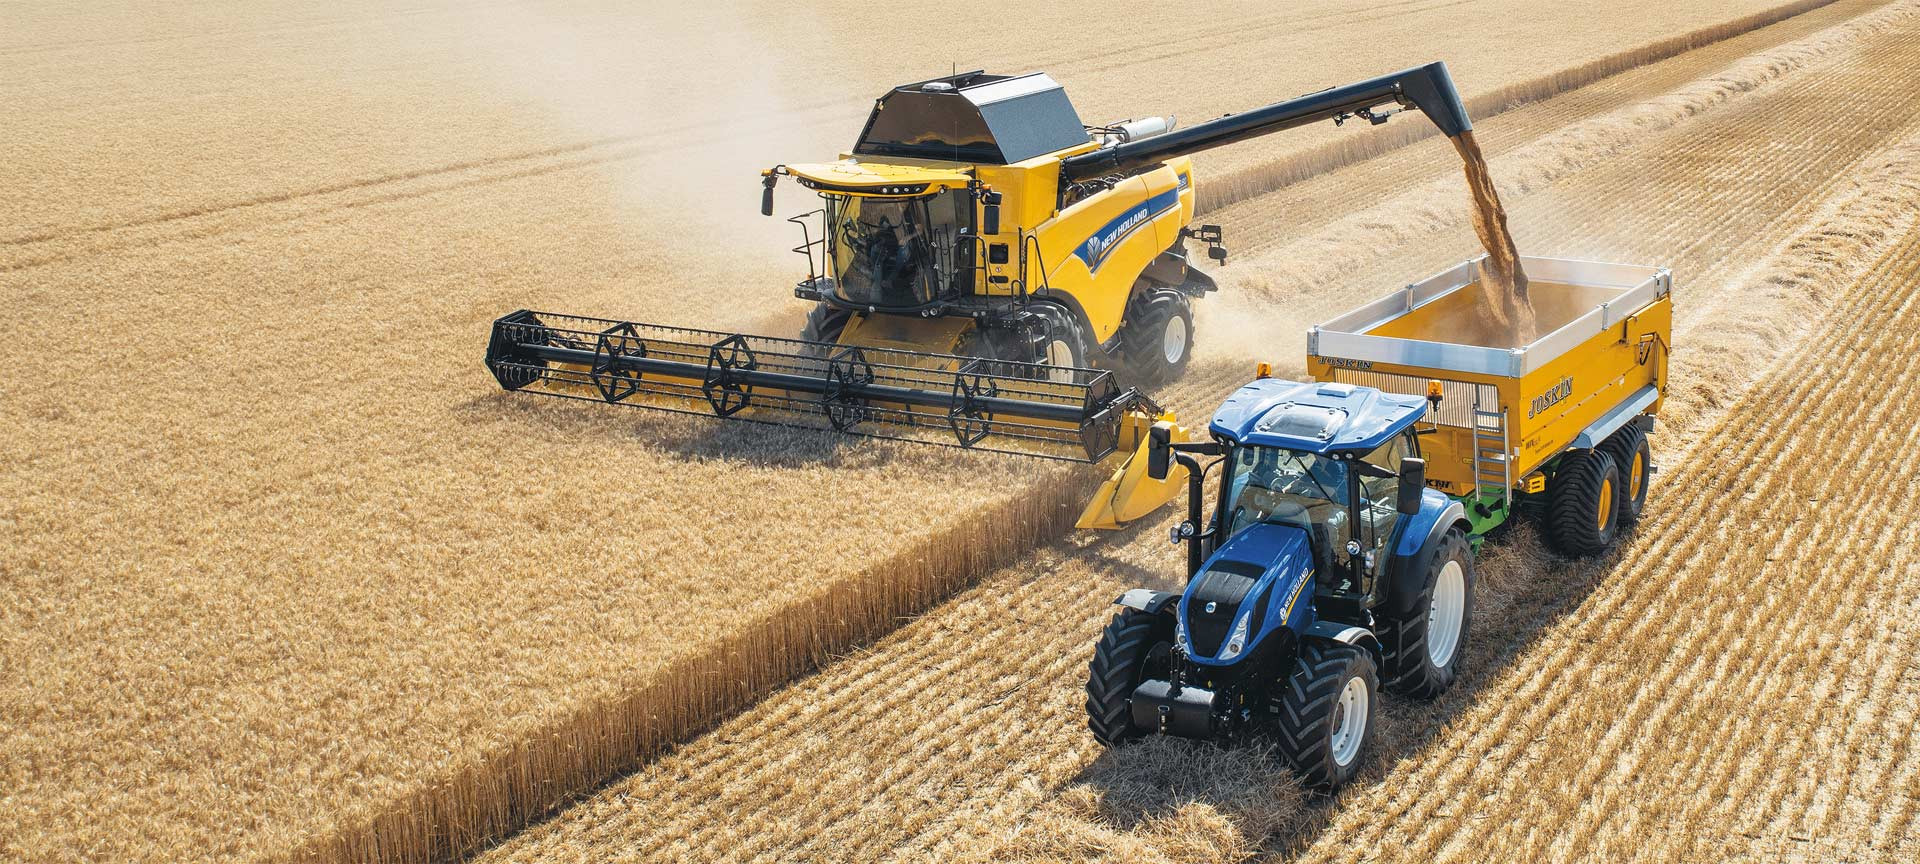 newtec_banner_newholland_01